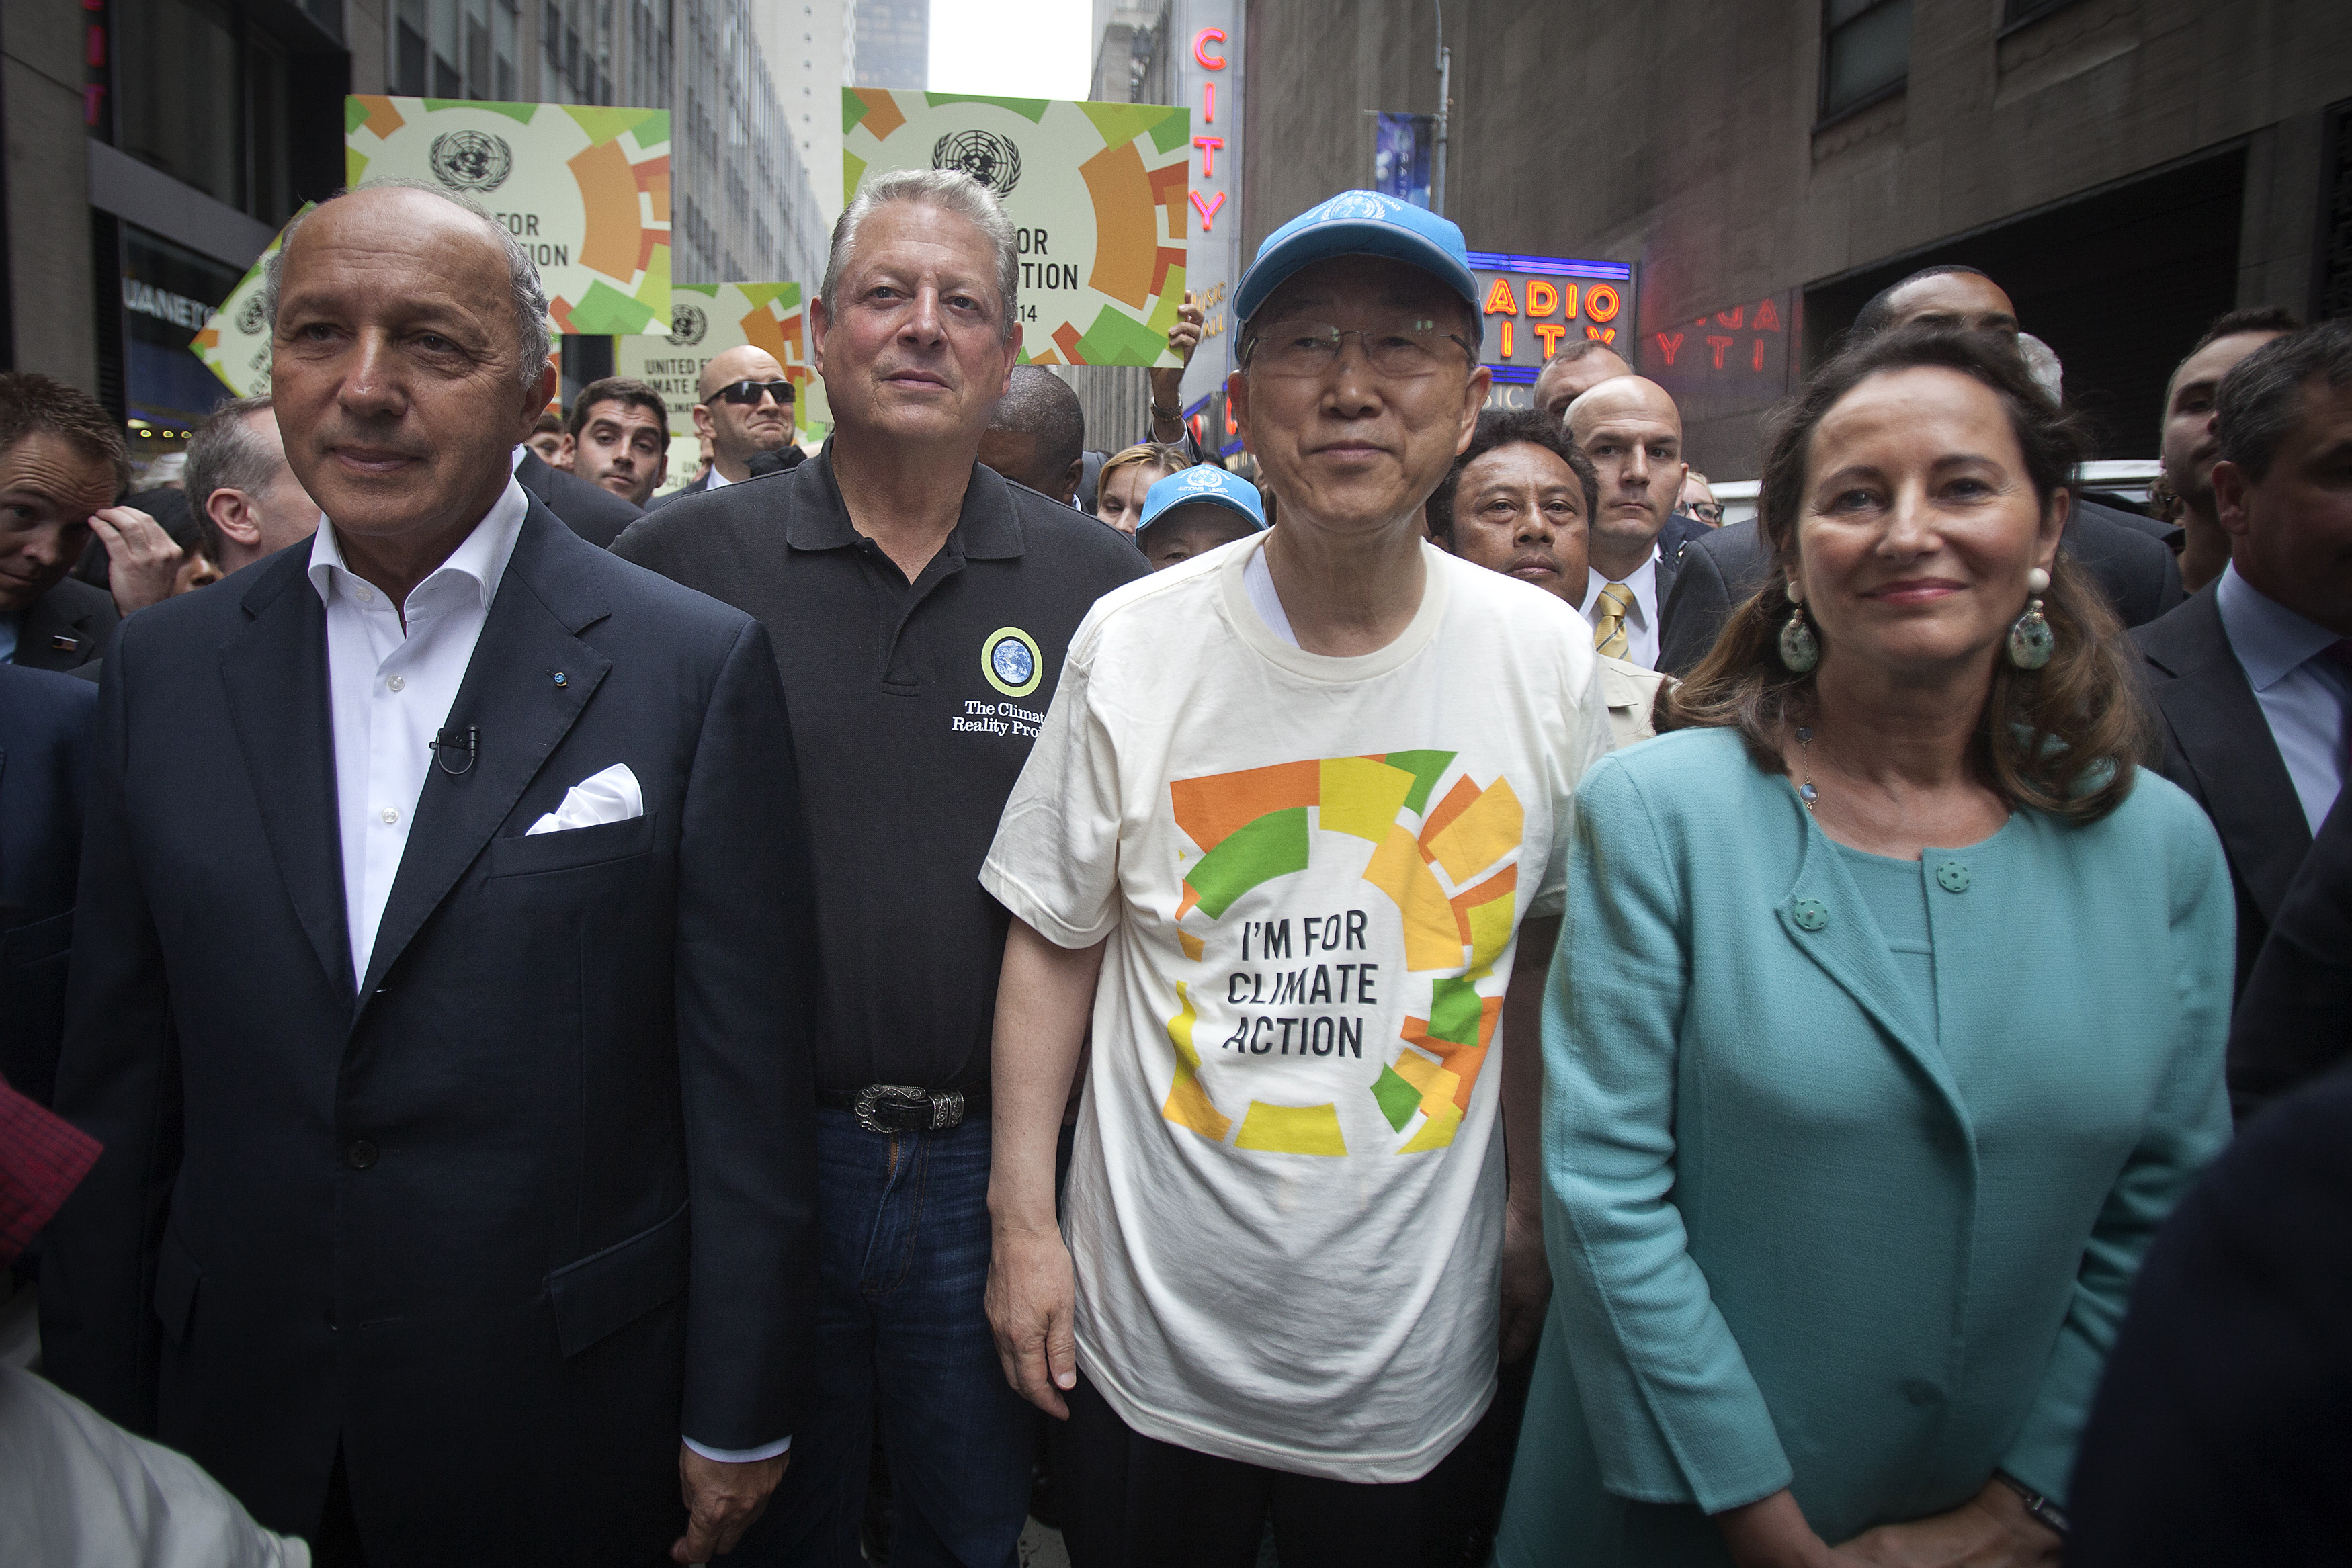 French Foreign Minister Laurent Fabius, former United States Vice President Al Gore, United Nations Secretary General Ban Ki-moon and French Environment Minister Segolene Royal take part in the "People's Climate March" down 6th Ave. in the Man